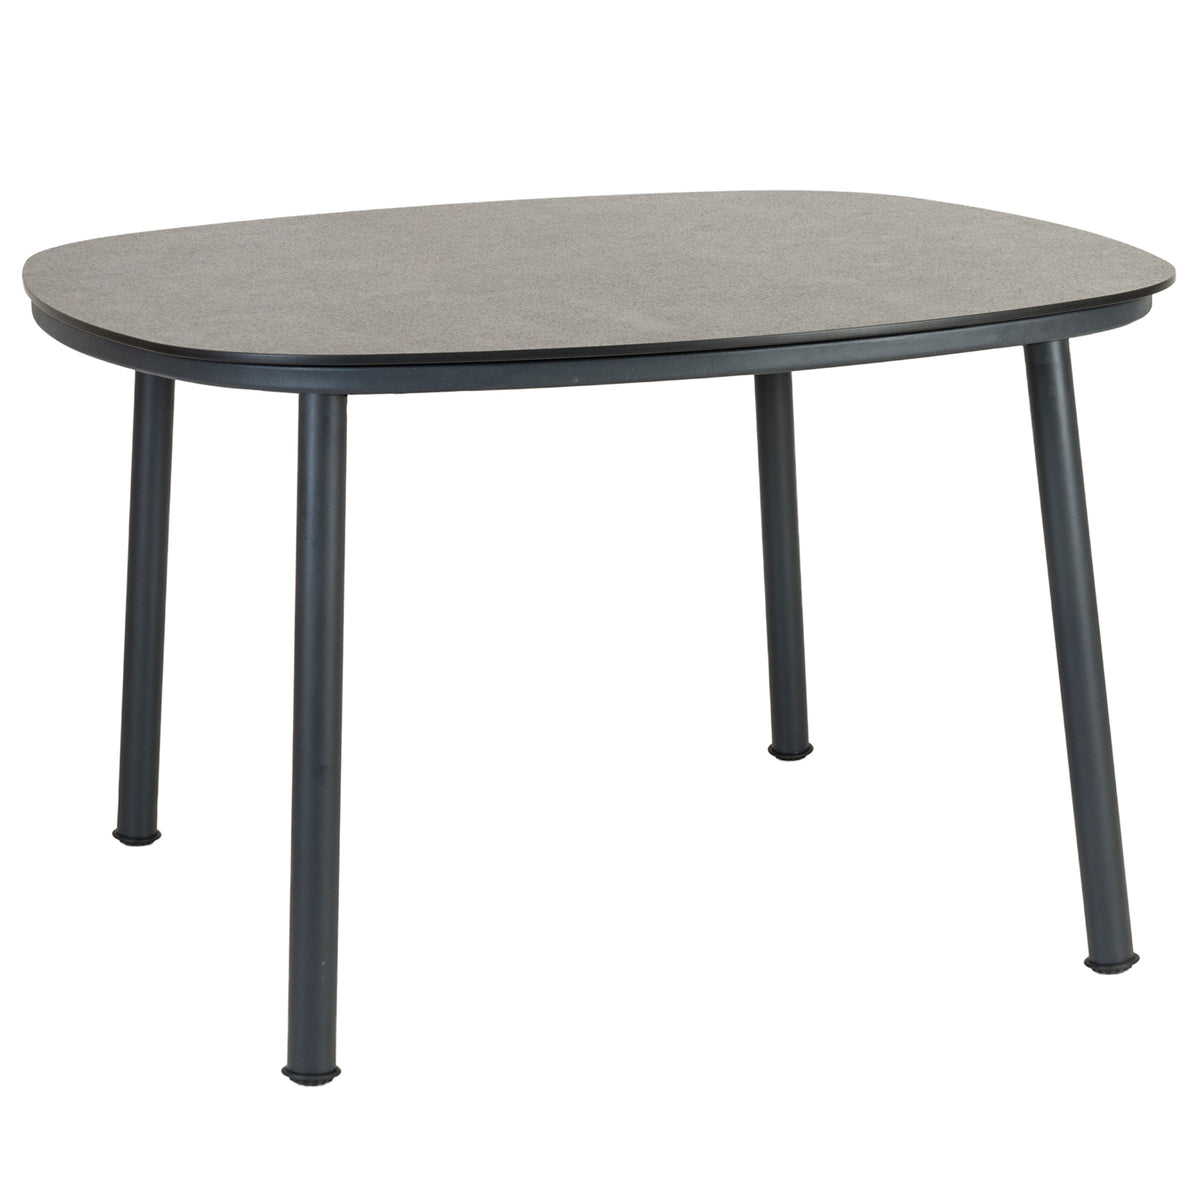 Alexander Rose 1.2m Cordial Grey Shaped Dining Table with Pebble Laminate Top